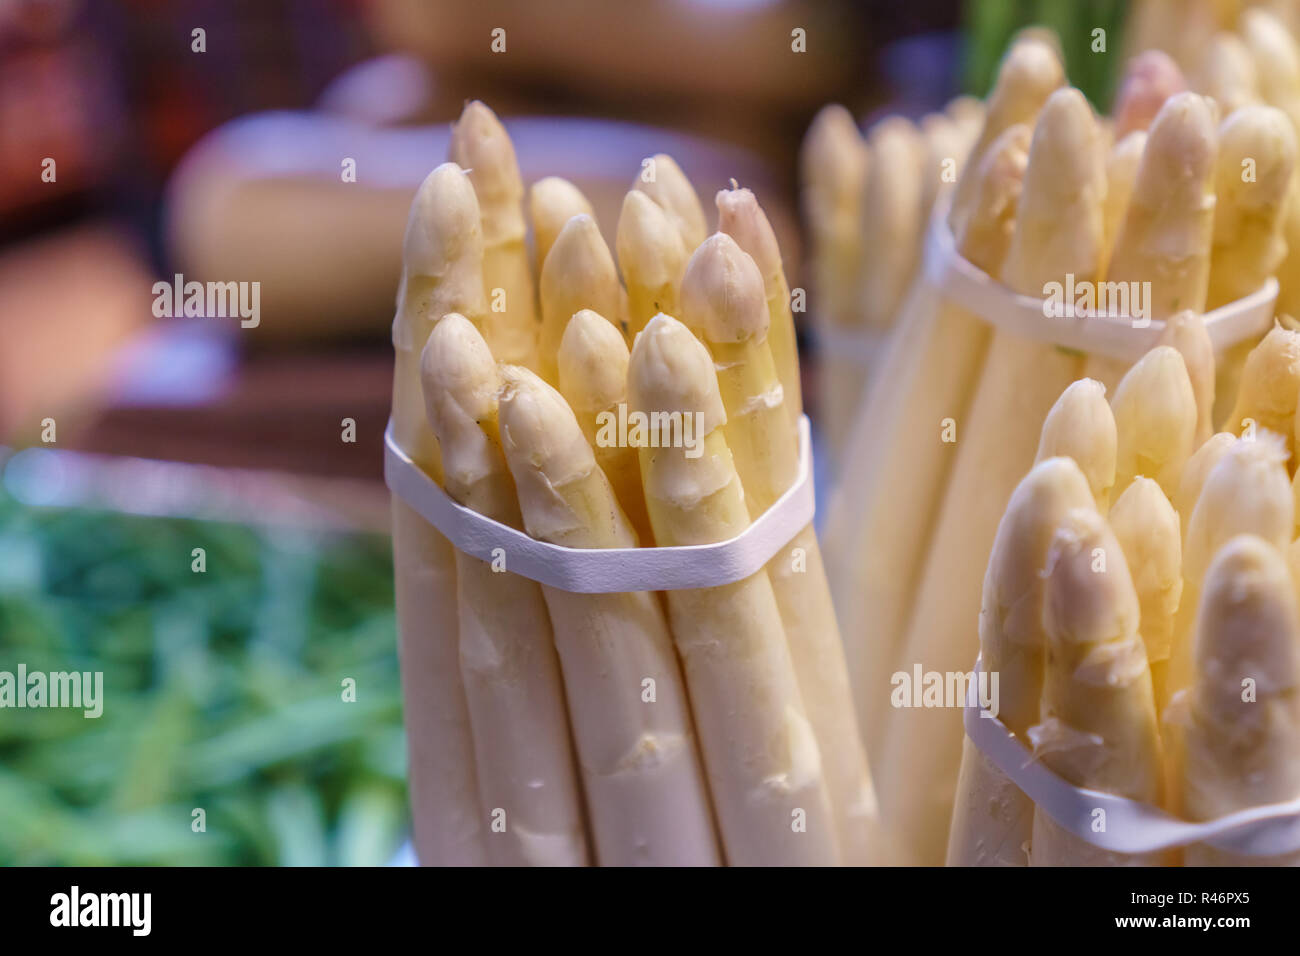 Close up of bunch of white asparagus in grocery store produce section Stock Photo